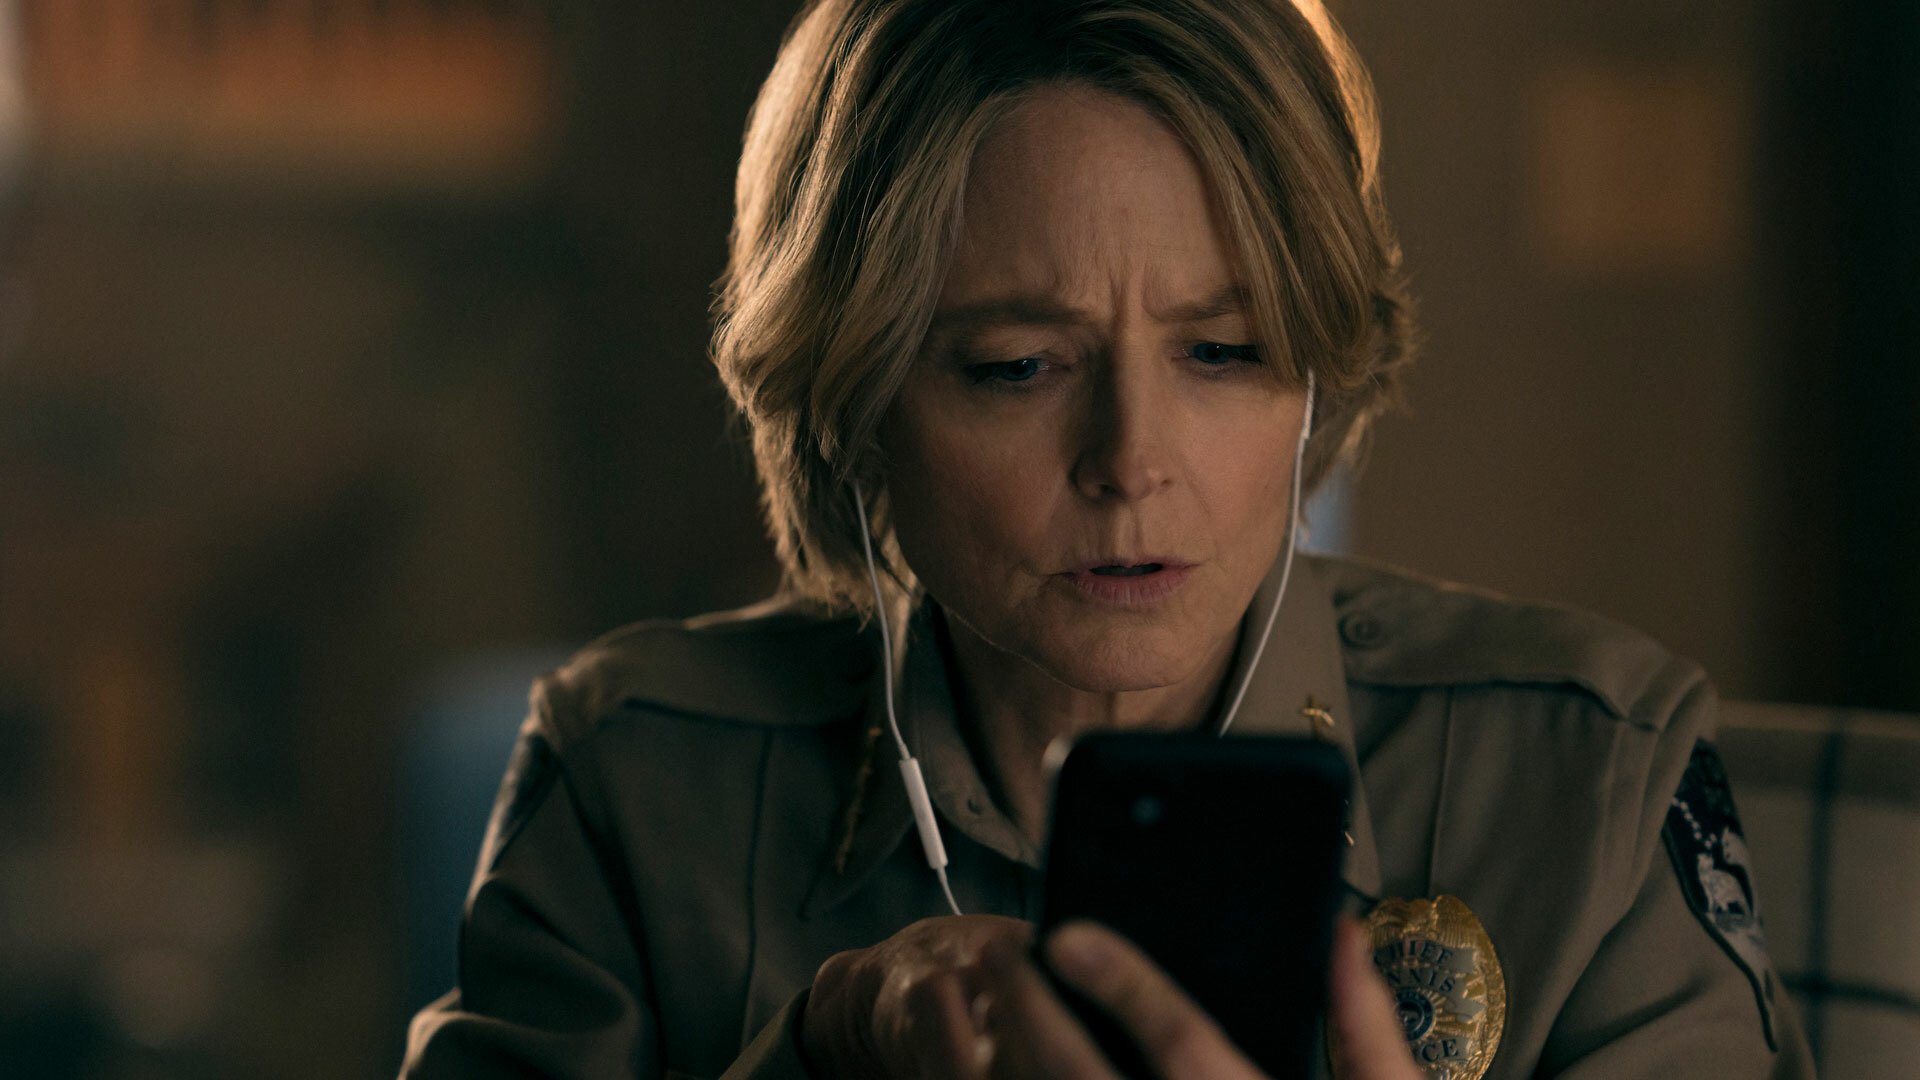 A police officer wearing headphones stares at a smartphone with concentration.